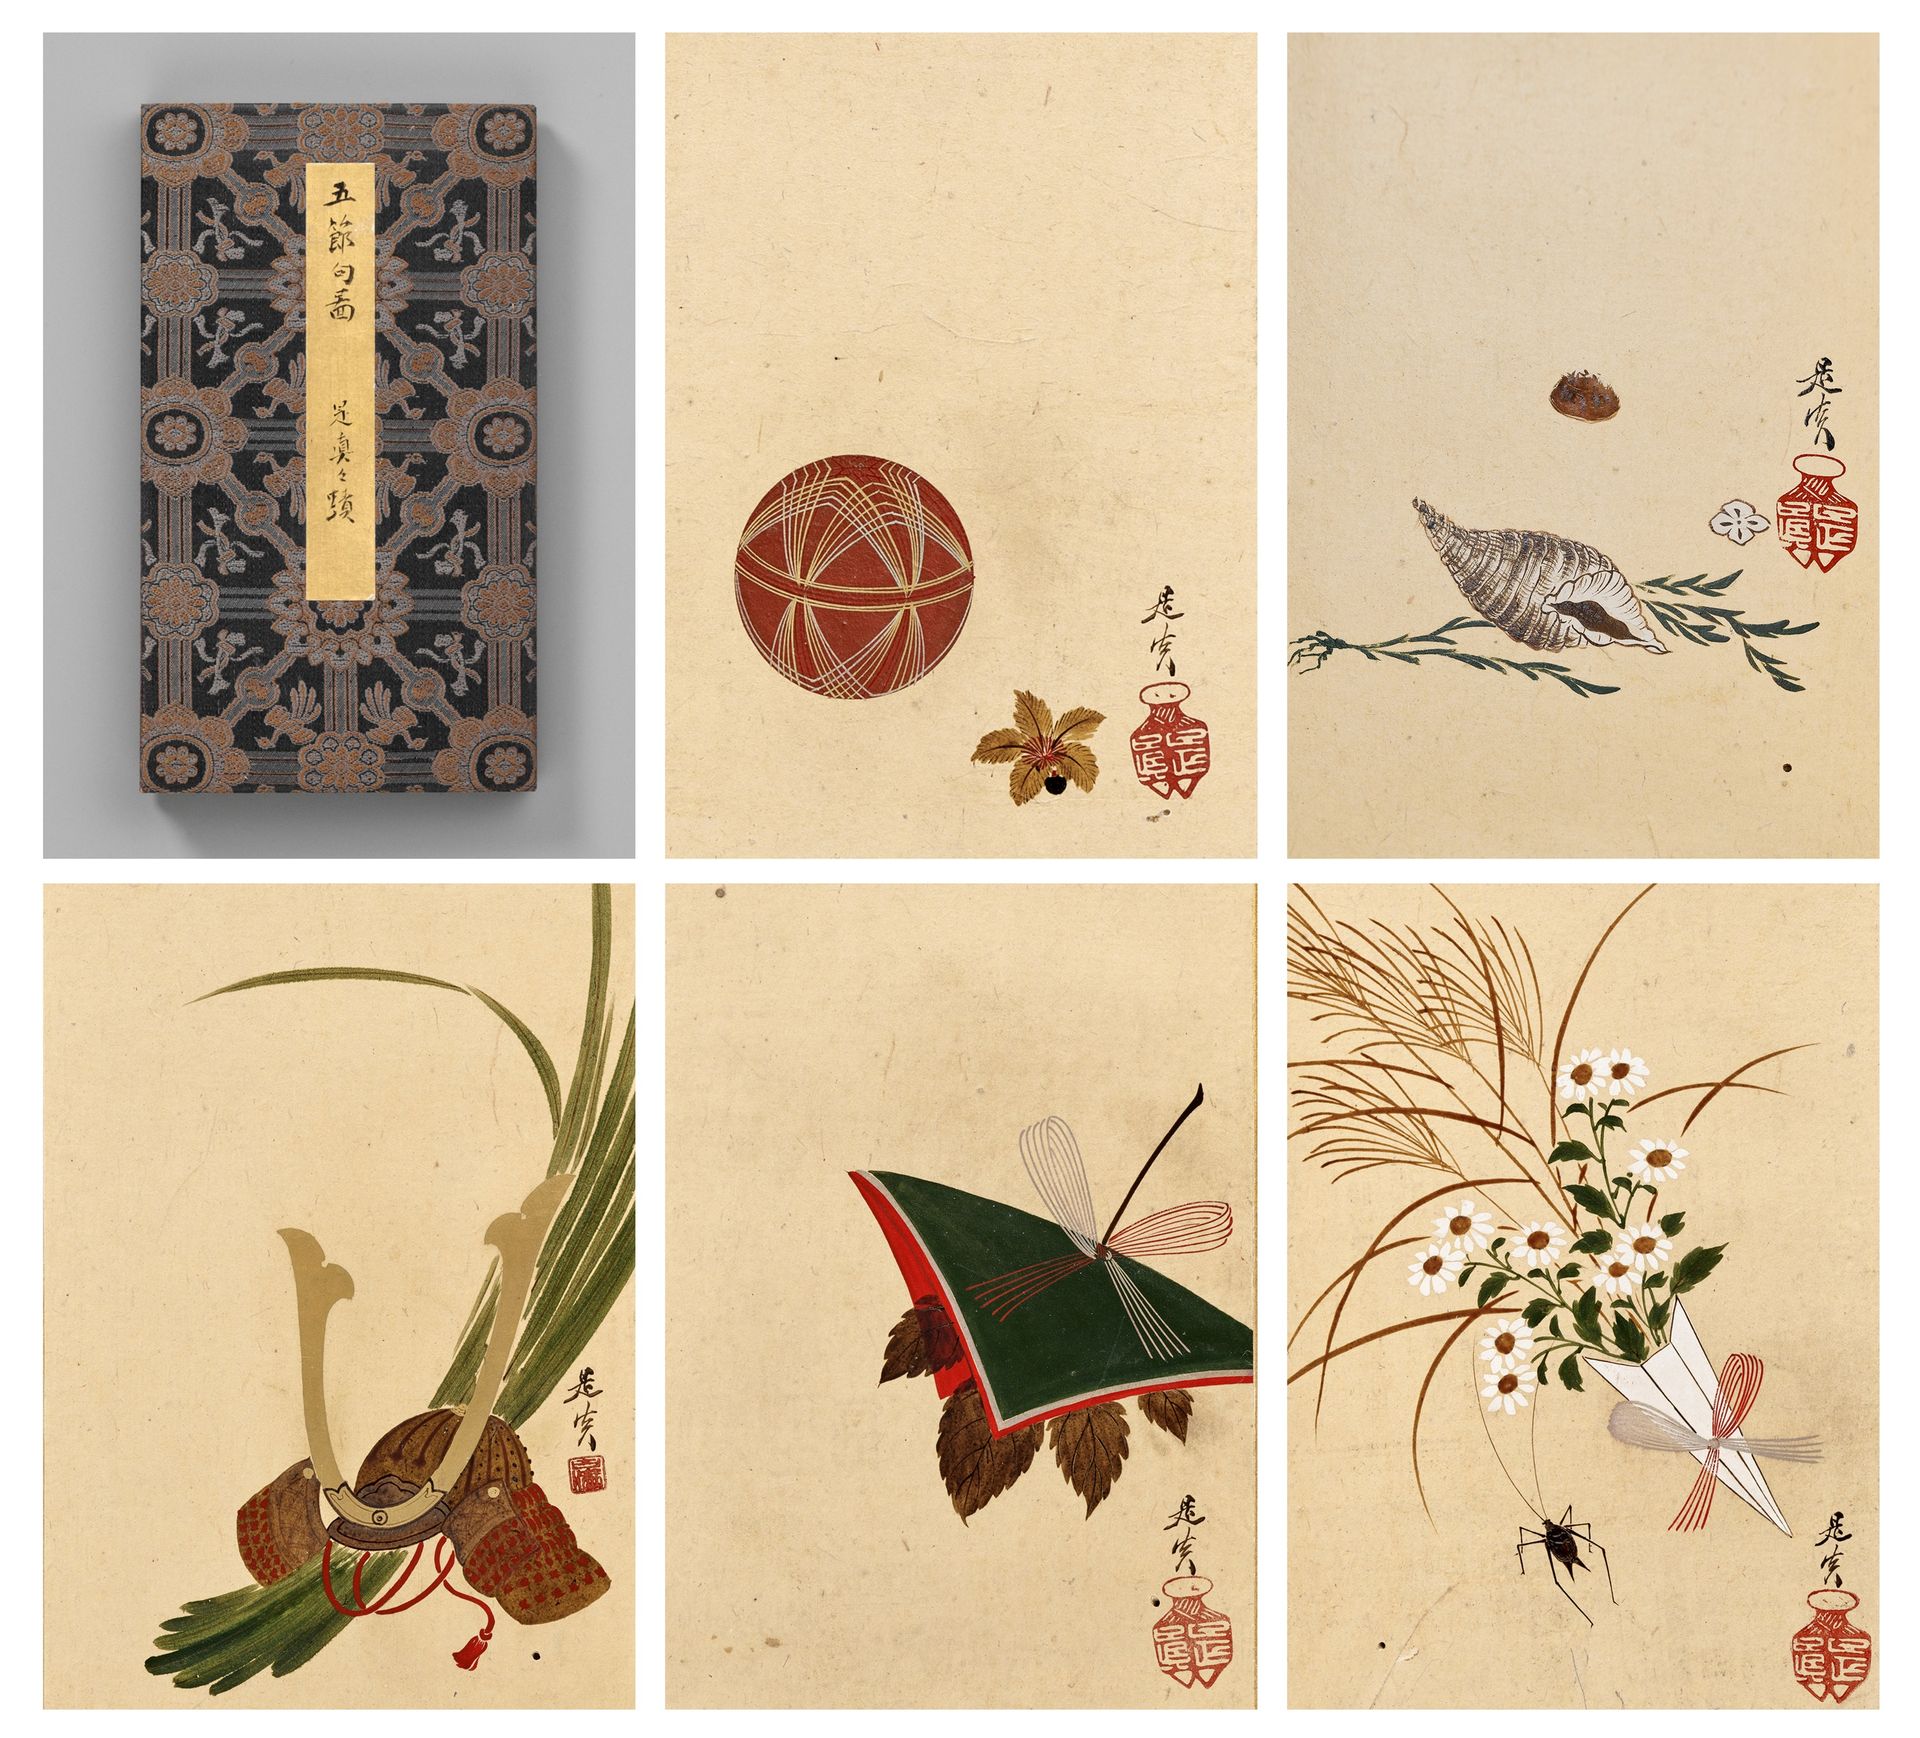 SHIBATA ZESHIN: AN IMPORTANT ALBUM OF FIVE LACQUER PAINTINGS DEPICTING THE GOSEK&hellip;